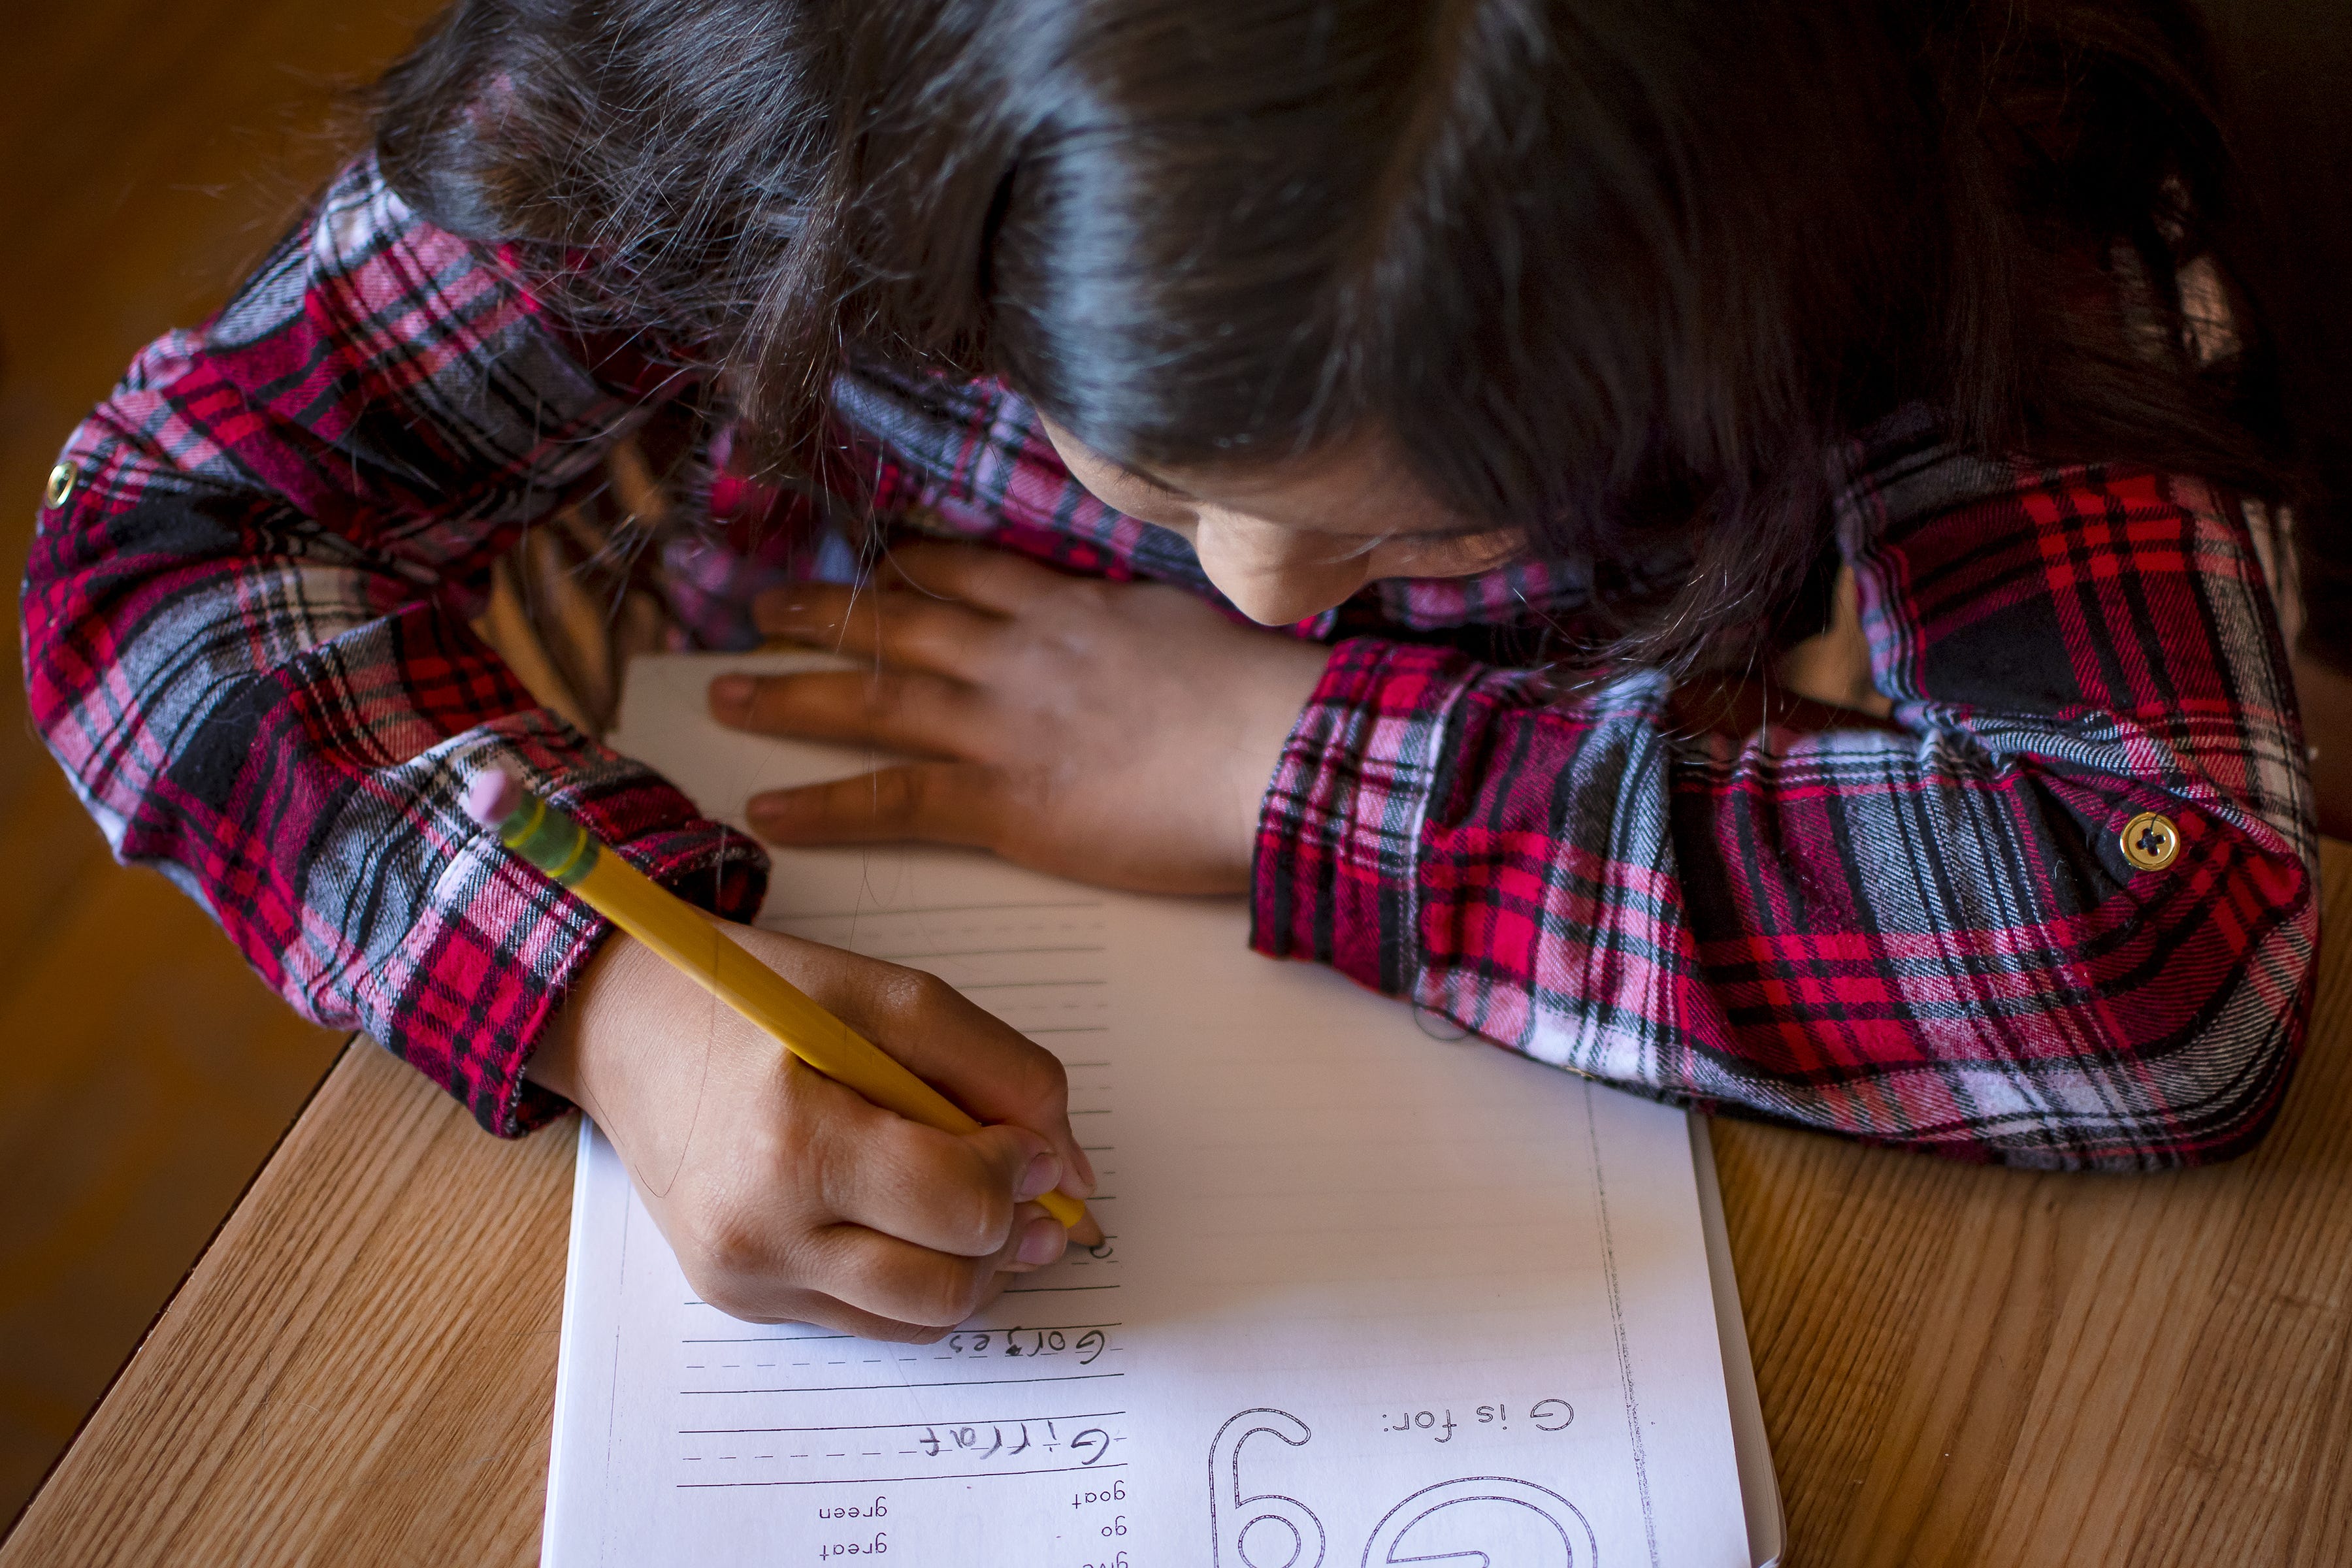 Eight-year-old Fernanda Davila works on a spelling packet at the kitchen table in her Phoenix home on March 8, 2022.